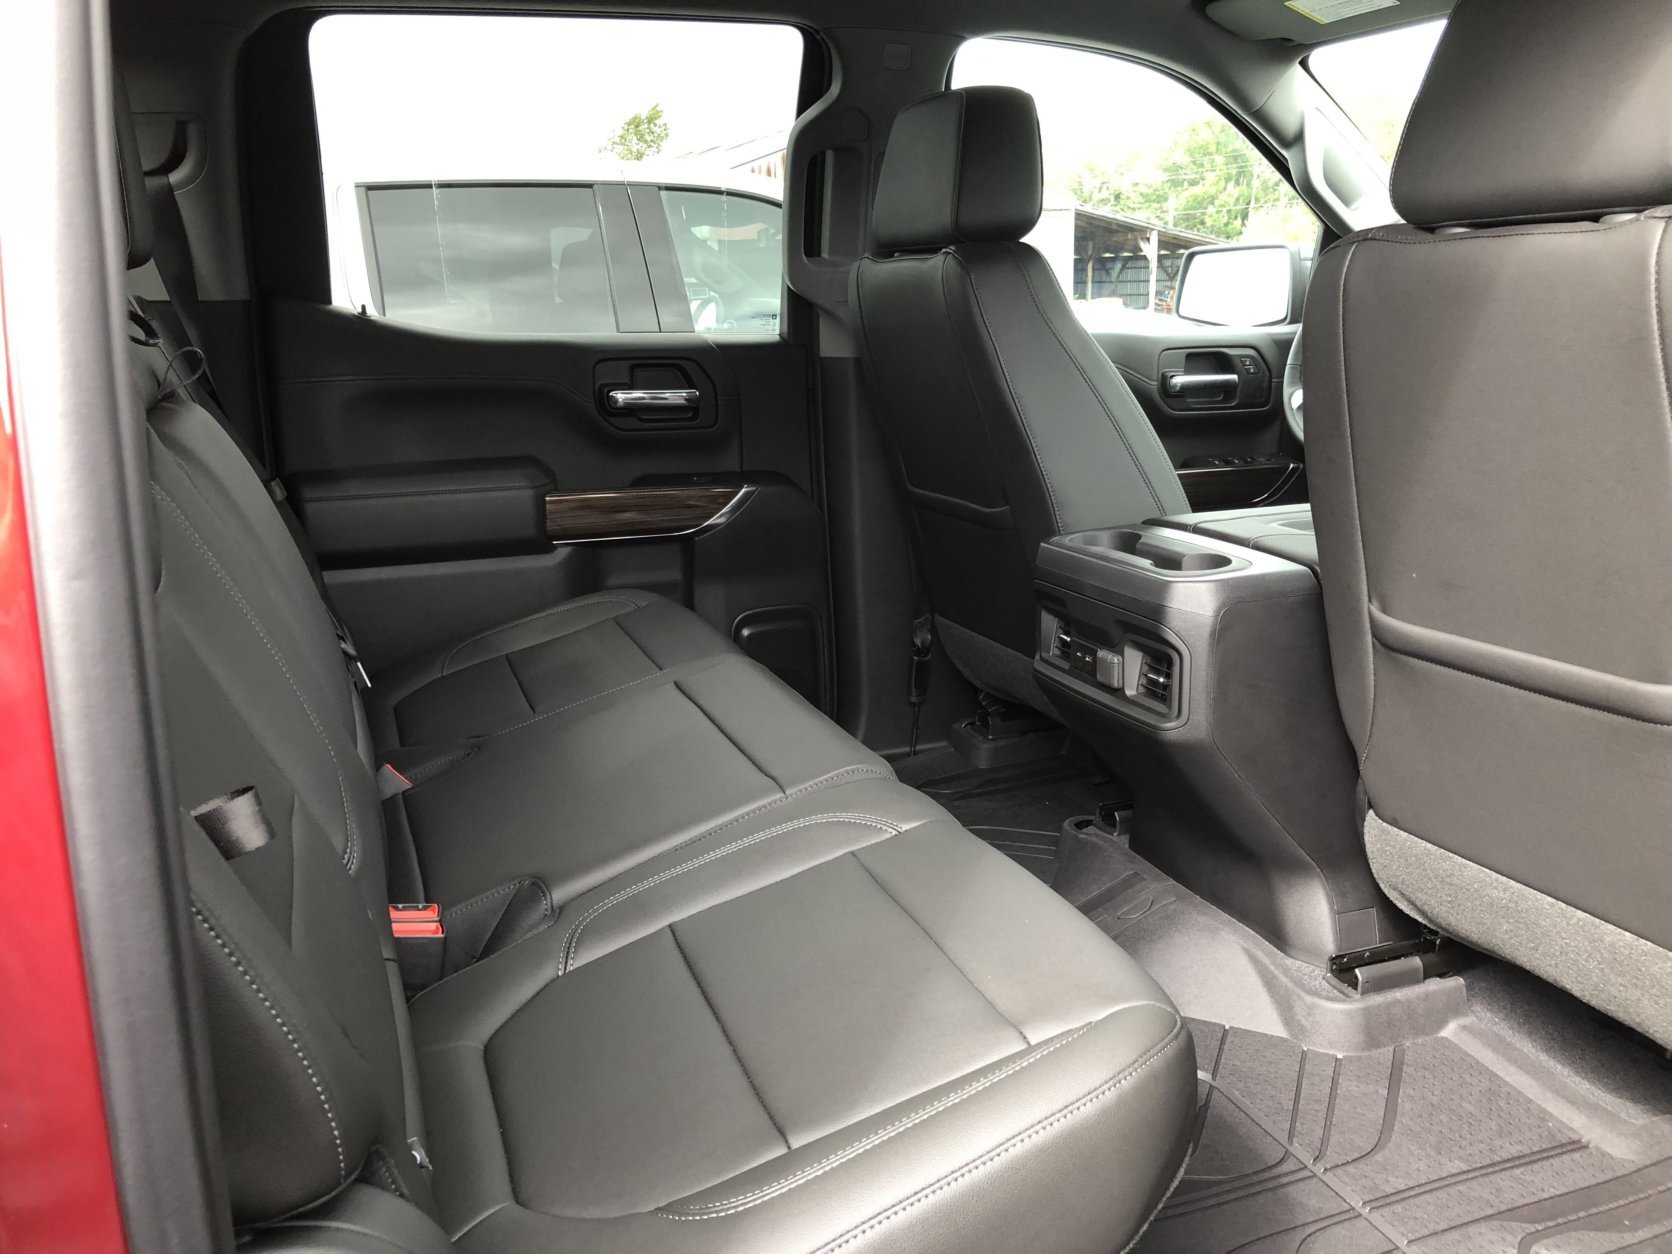 Inside the new Silverado has seen a growth spurt as well, especially in the crew cab version. Rear seat passengers see an extra 3 inches of space making it very roomy now. (WTOP/Mike Parris)